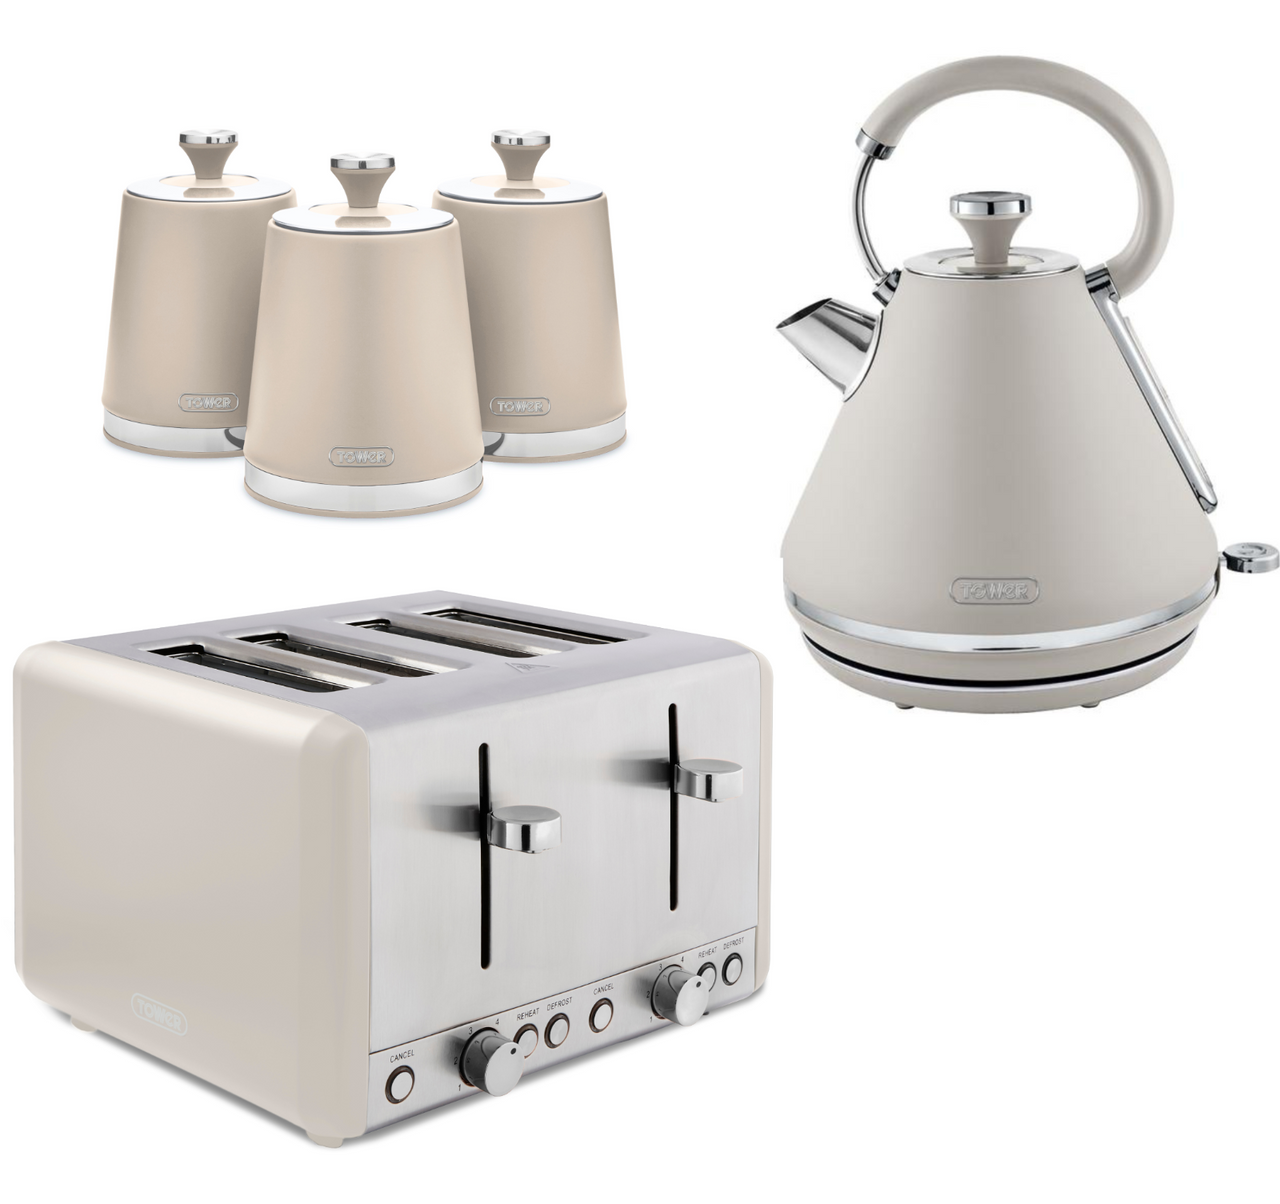 Tower Cavaletto Pyramid Kettle, 4 Slice Toaster & Canisters Matching Set in Latte with Chrome Accents